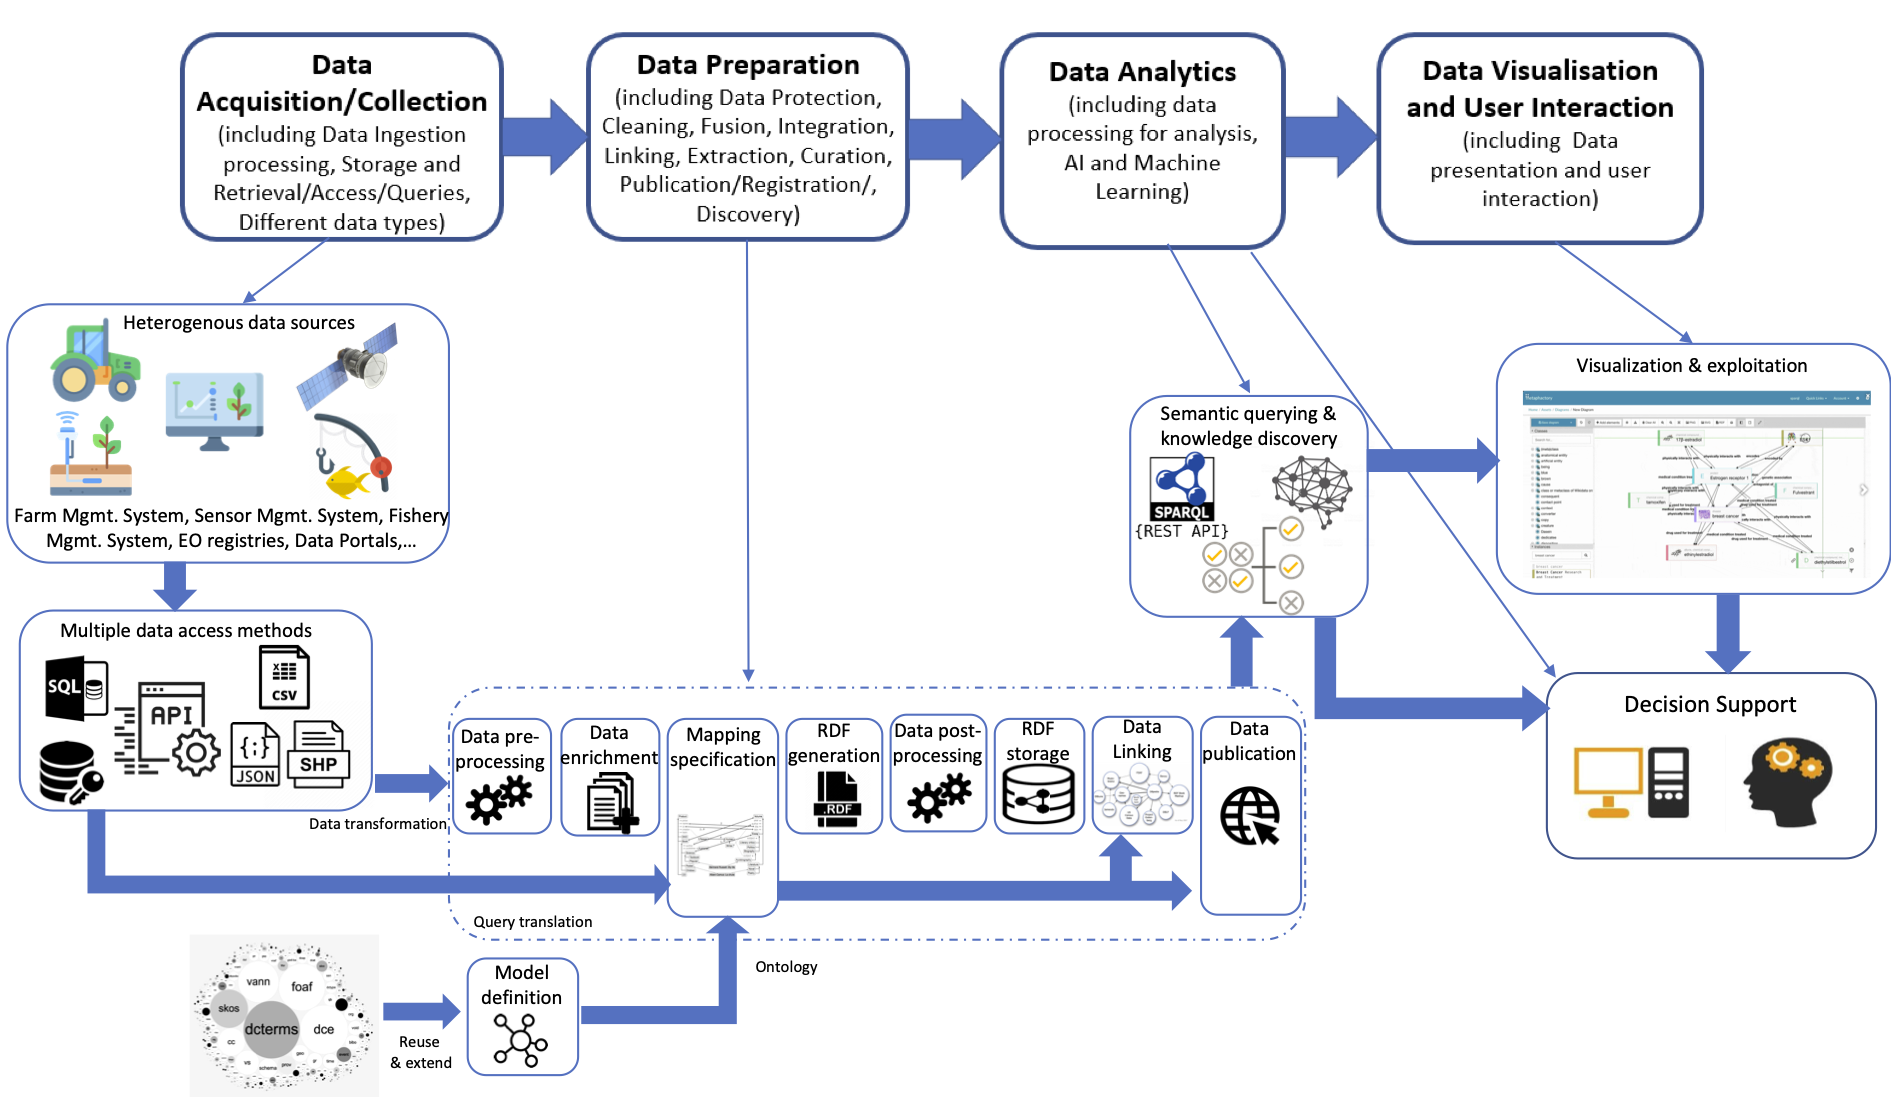 Linked Data pipelines automate the processes of transforming and publishing different input datasets from various heterogeneous sources as Linked Data